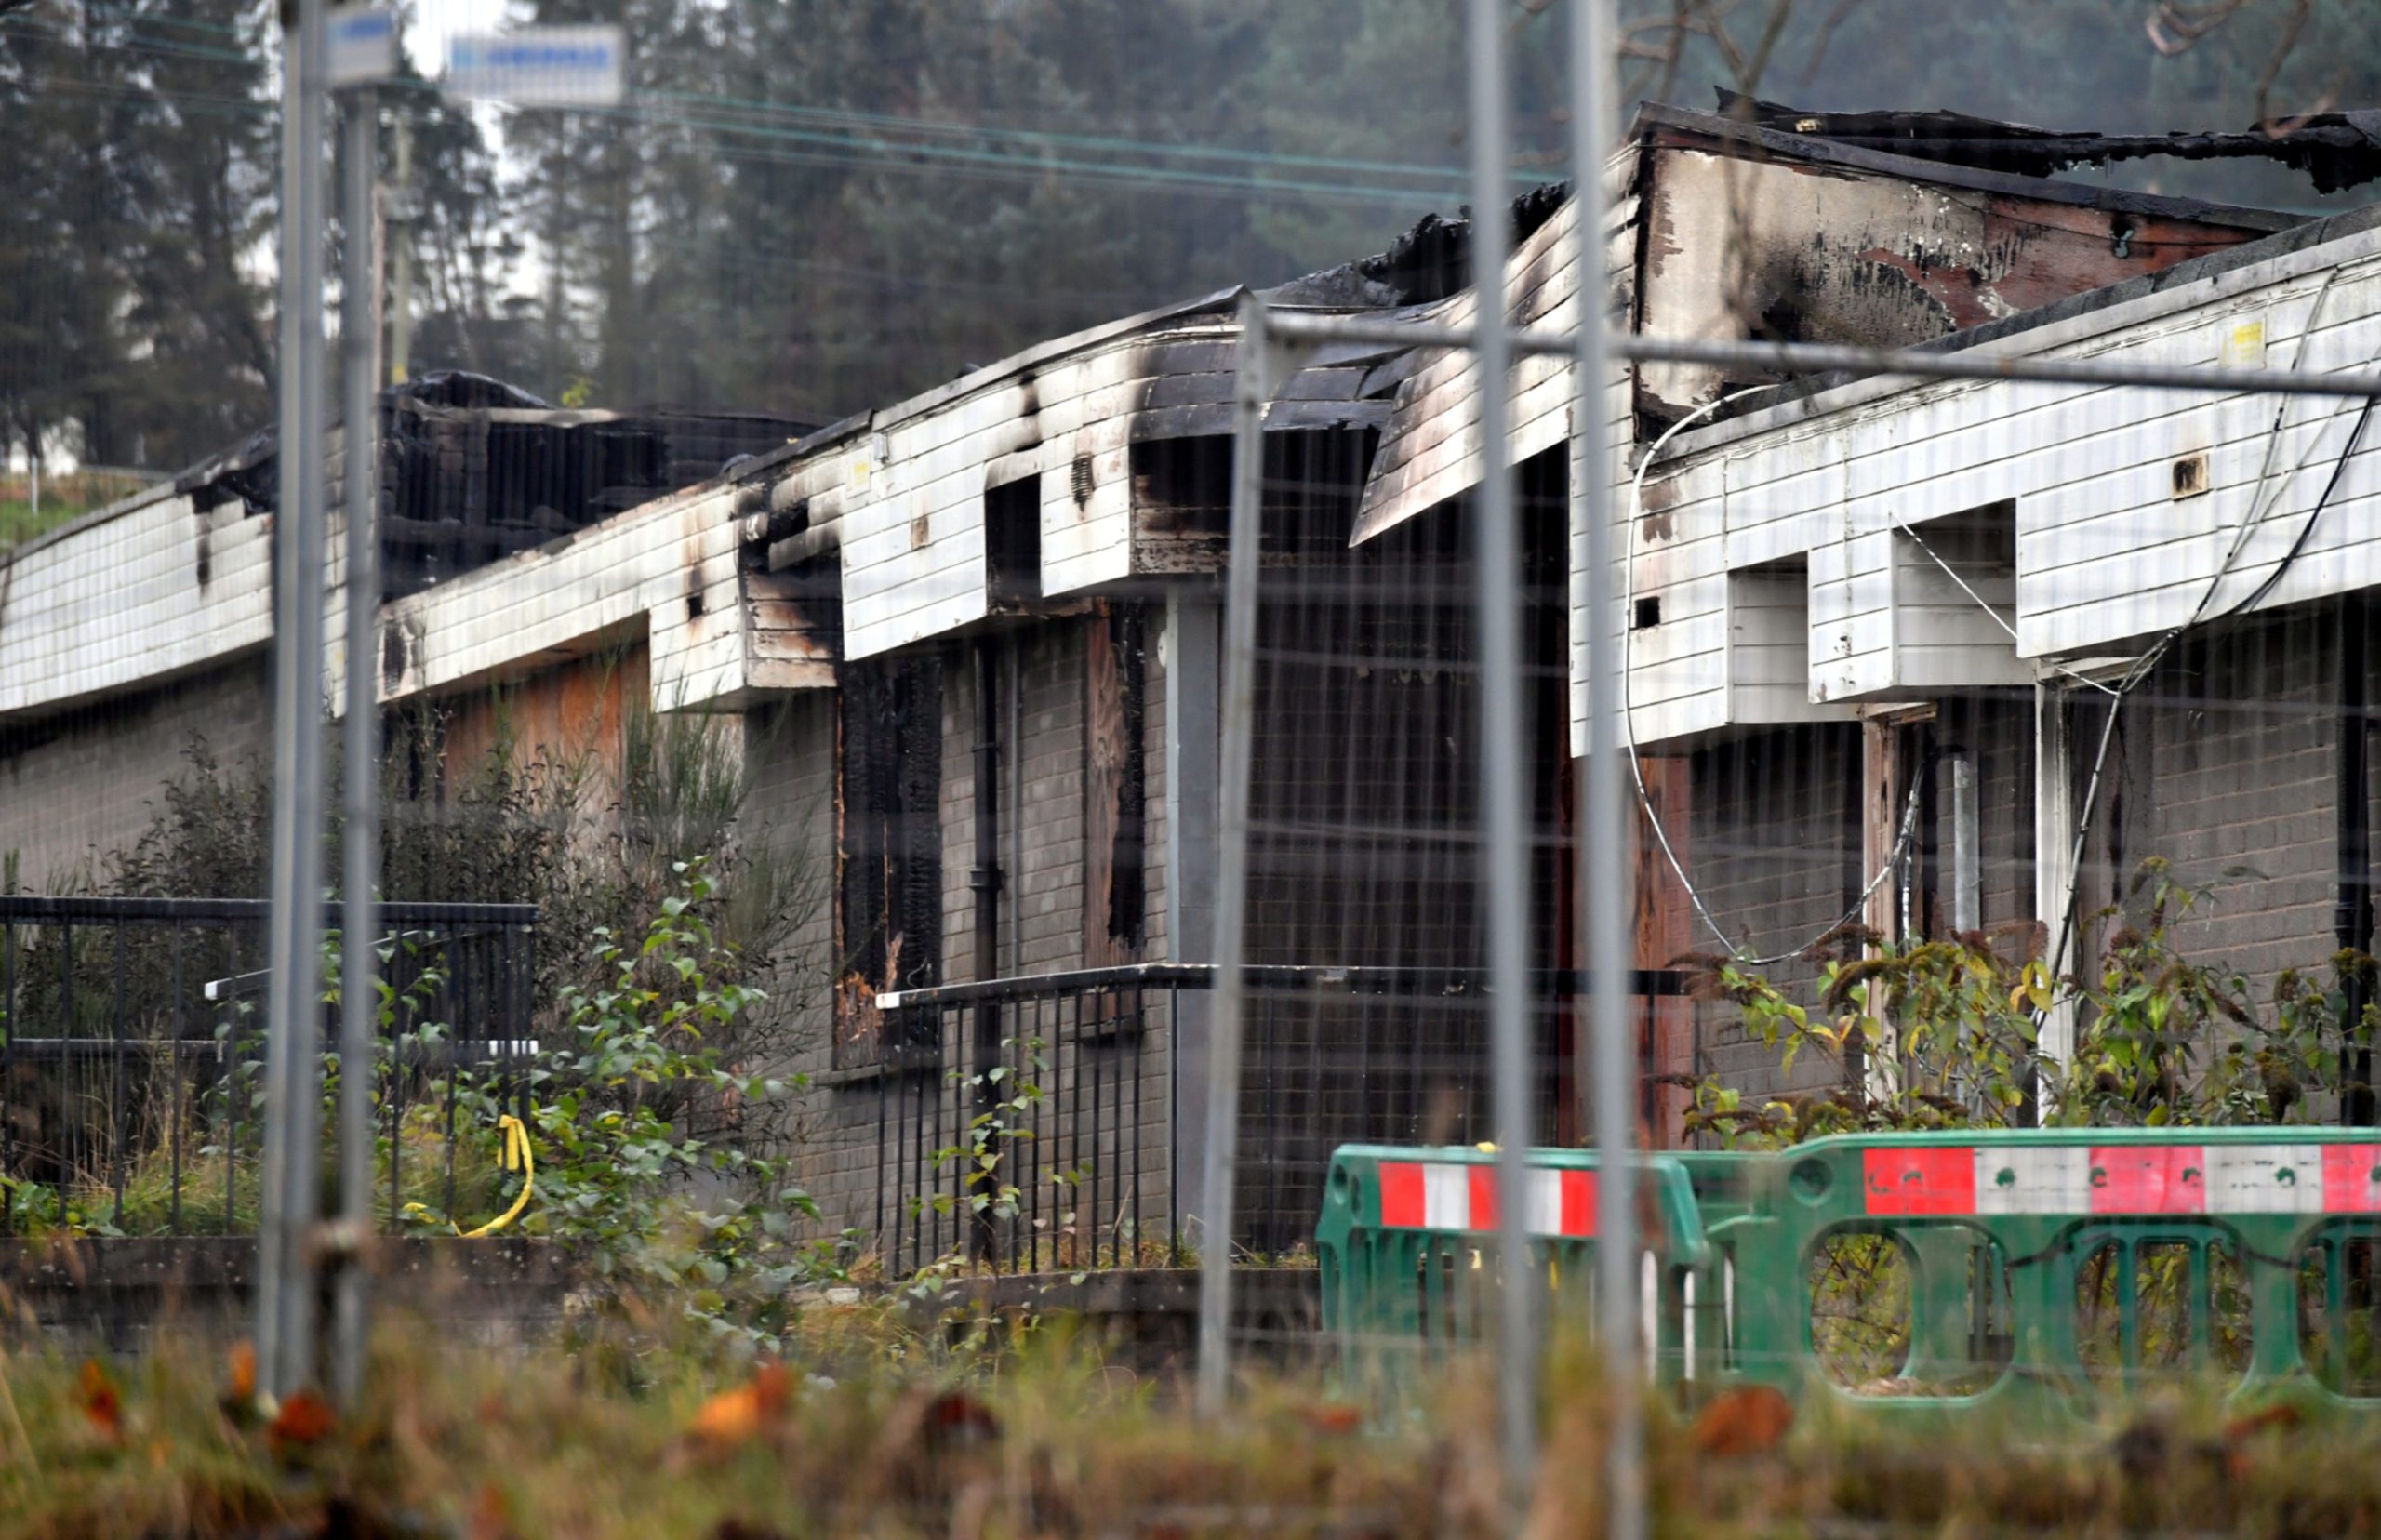 The fire at Brimmond School was one of many deliberate fires in the north-east.